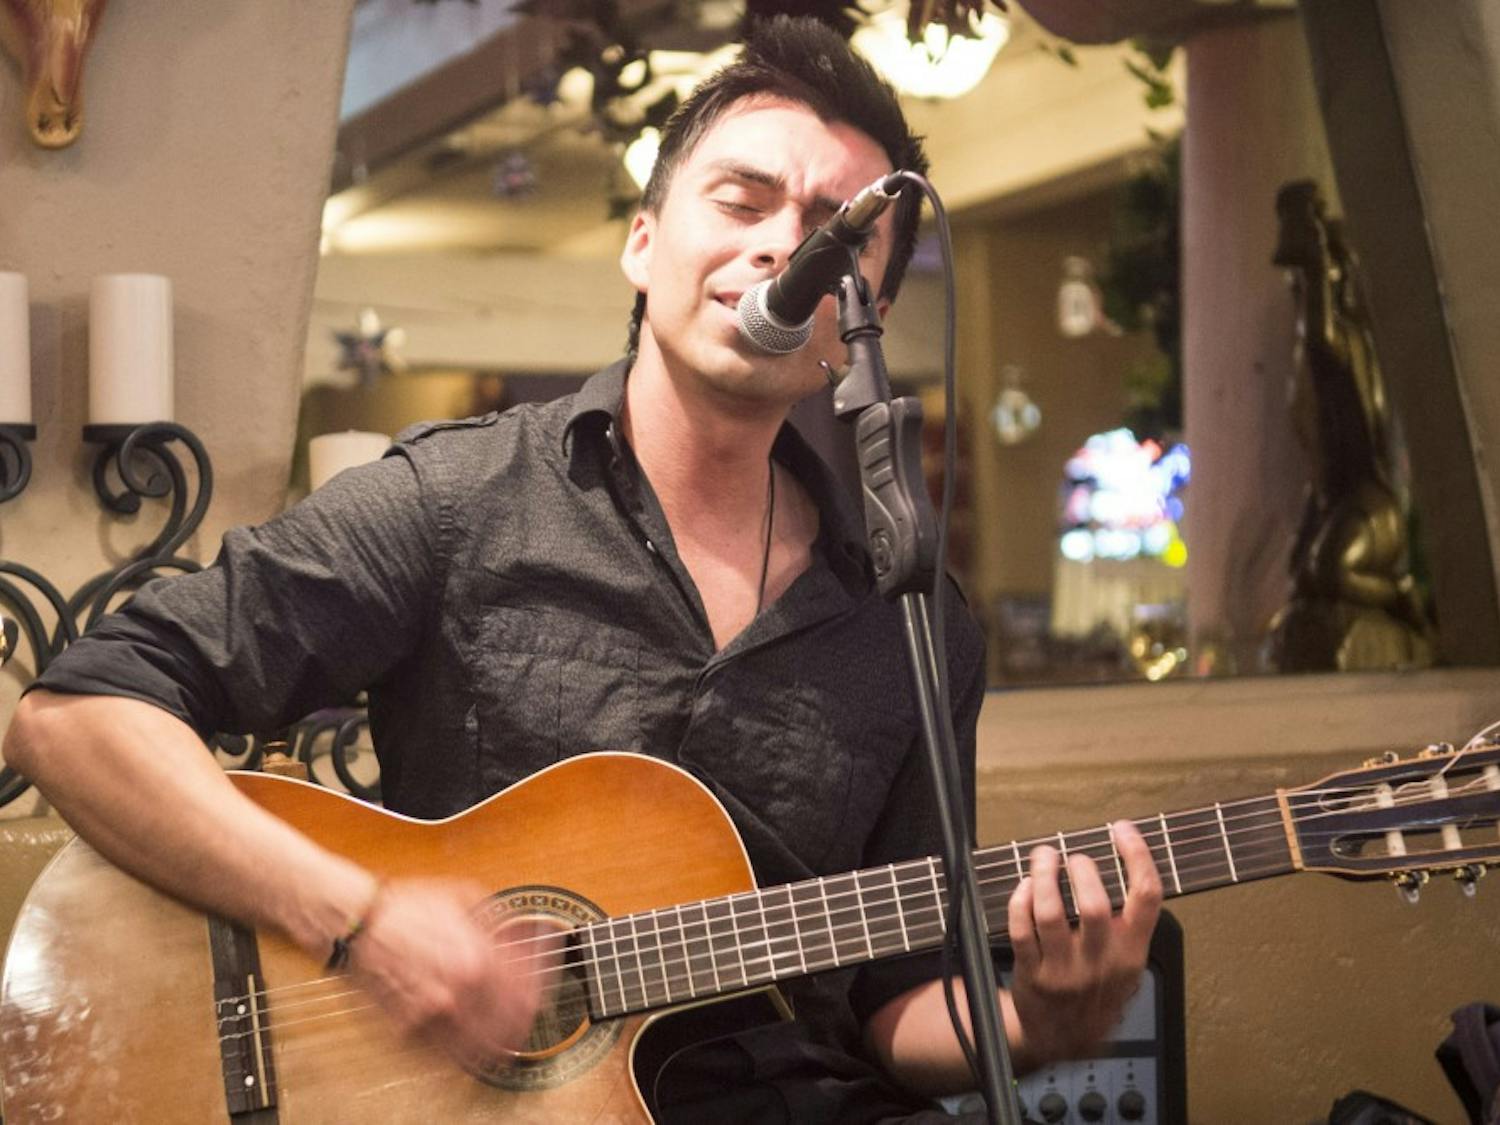 Diego Manrique, senior Music major, plays at Hacienda del Rio restaurant in Albuquerque’s Old Town on Oct. 21. Manrique and three other students formed a latin music band called Sol de La Noche to play at different restaurants and locations.